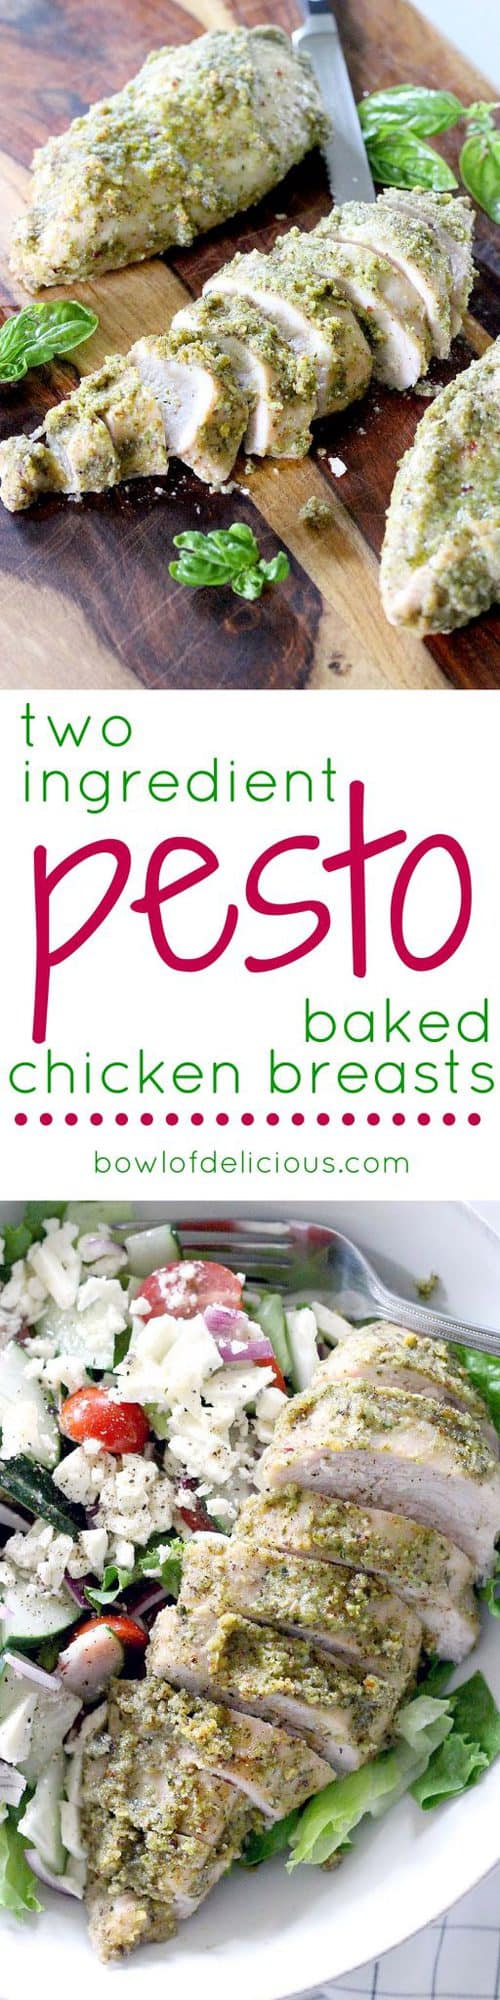 Pesto Baked Chicken Breasts: TWO INGREDIENTS is all you need for this healthy, paleo, low carb, lean protein to enjoy as a main course or to add to salads, pizza, sandwiches, etc.